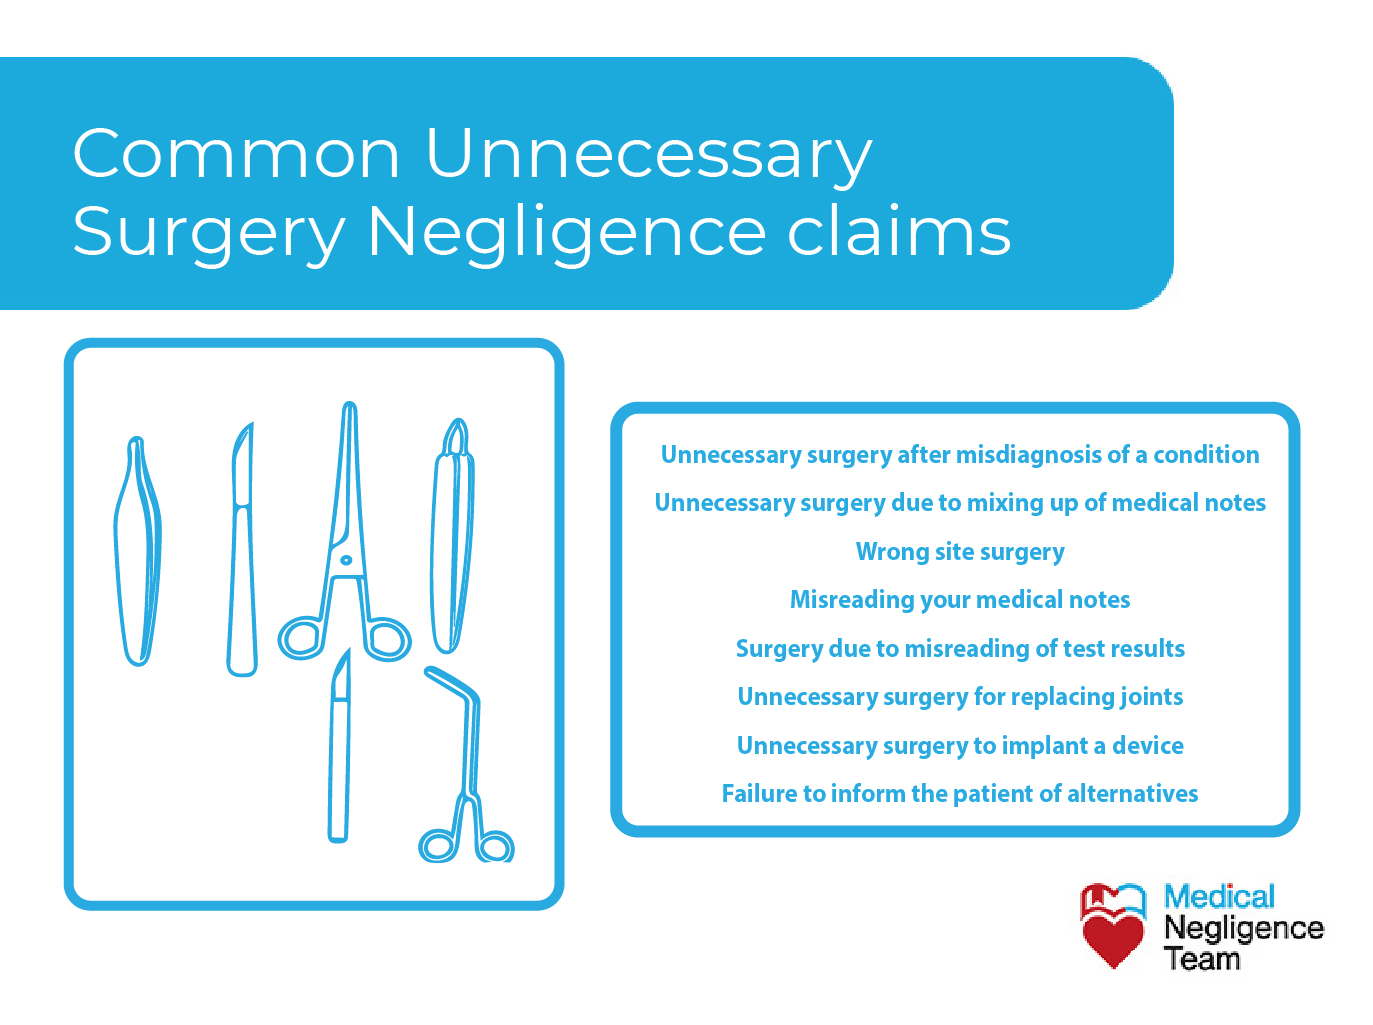 Common Unnecessary Surgery Negligence claims